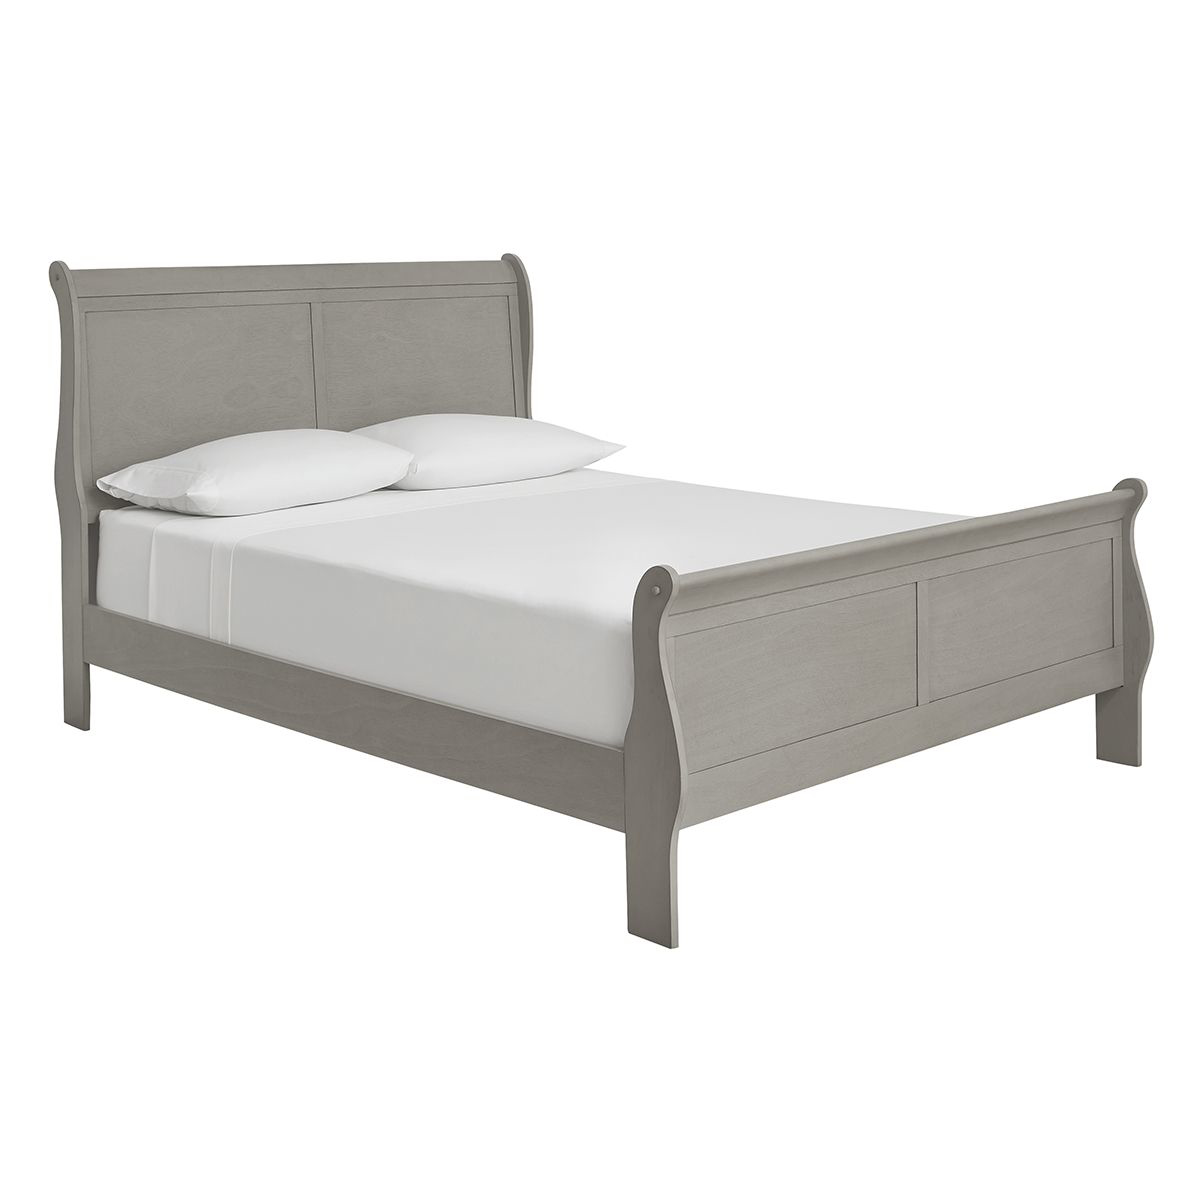 Picture of LOUIS SLEIGH QUEEN BED IN GREY